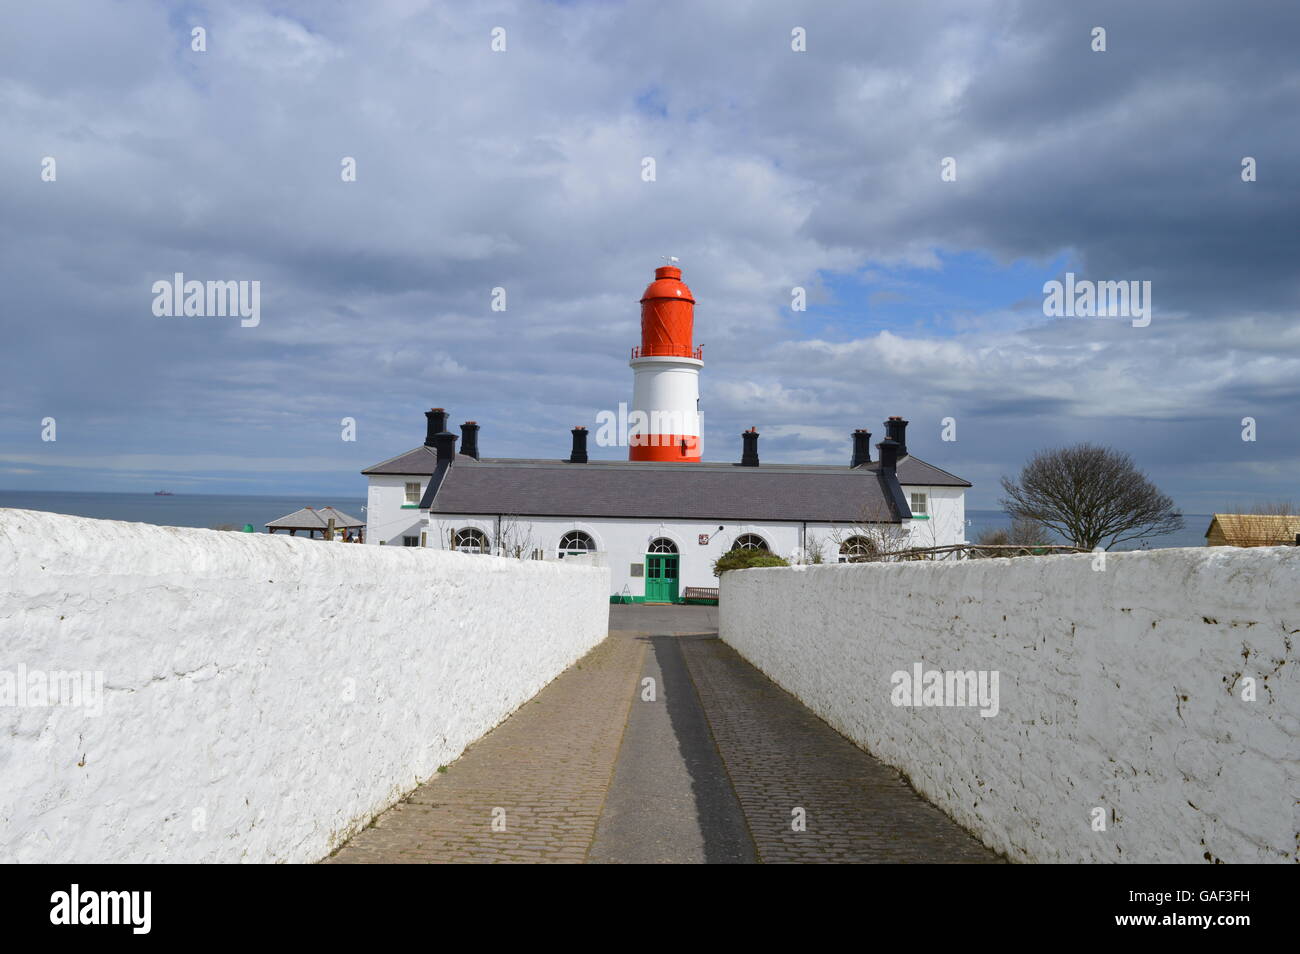 Souter phare, National Trust, Tyneside Banque D'Images